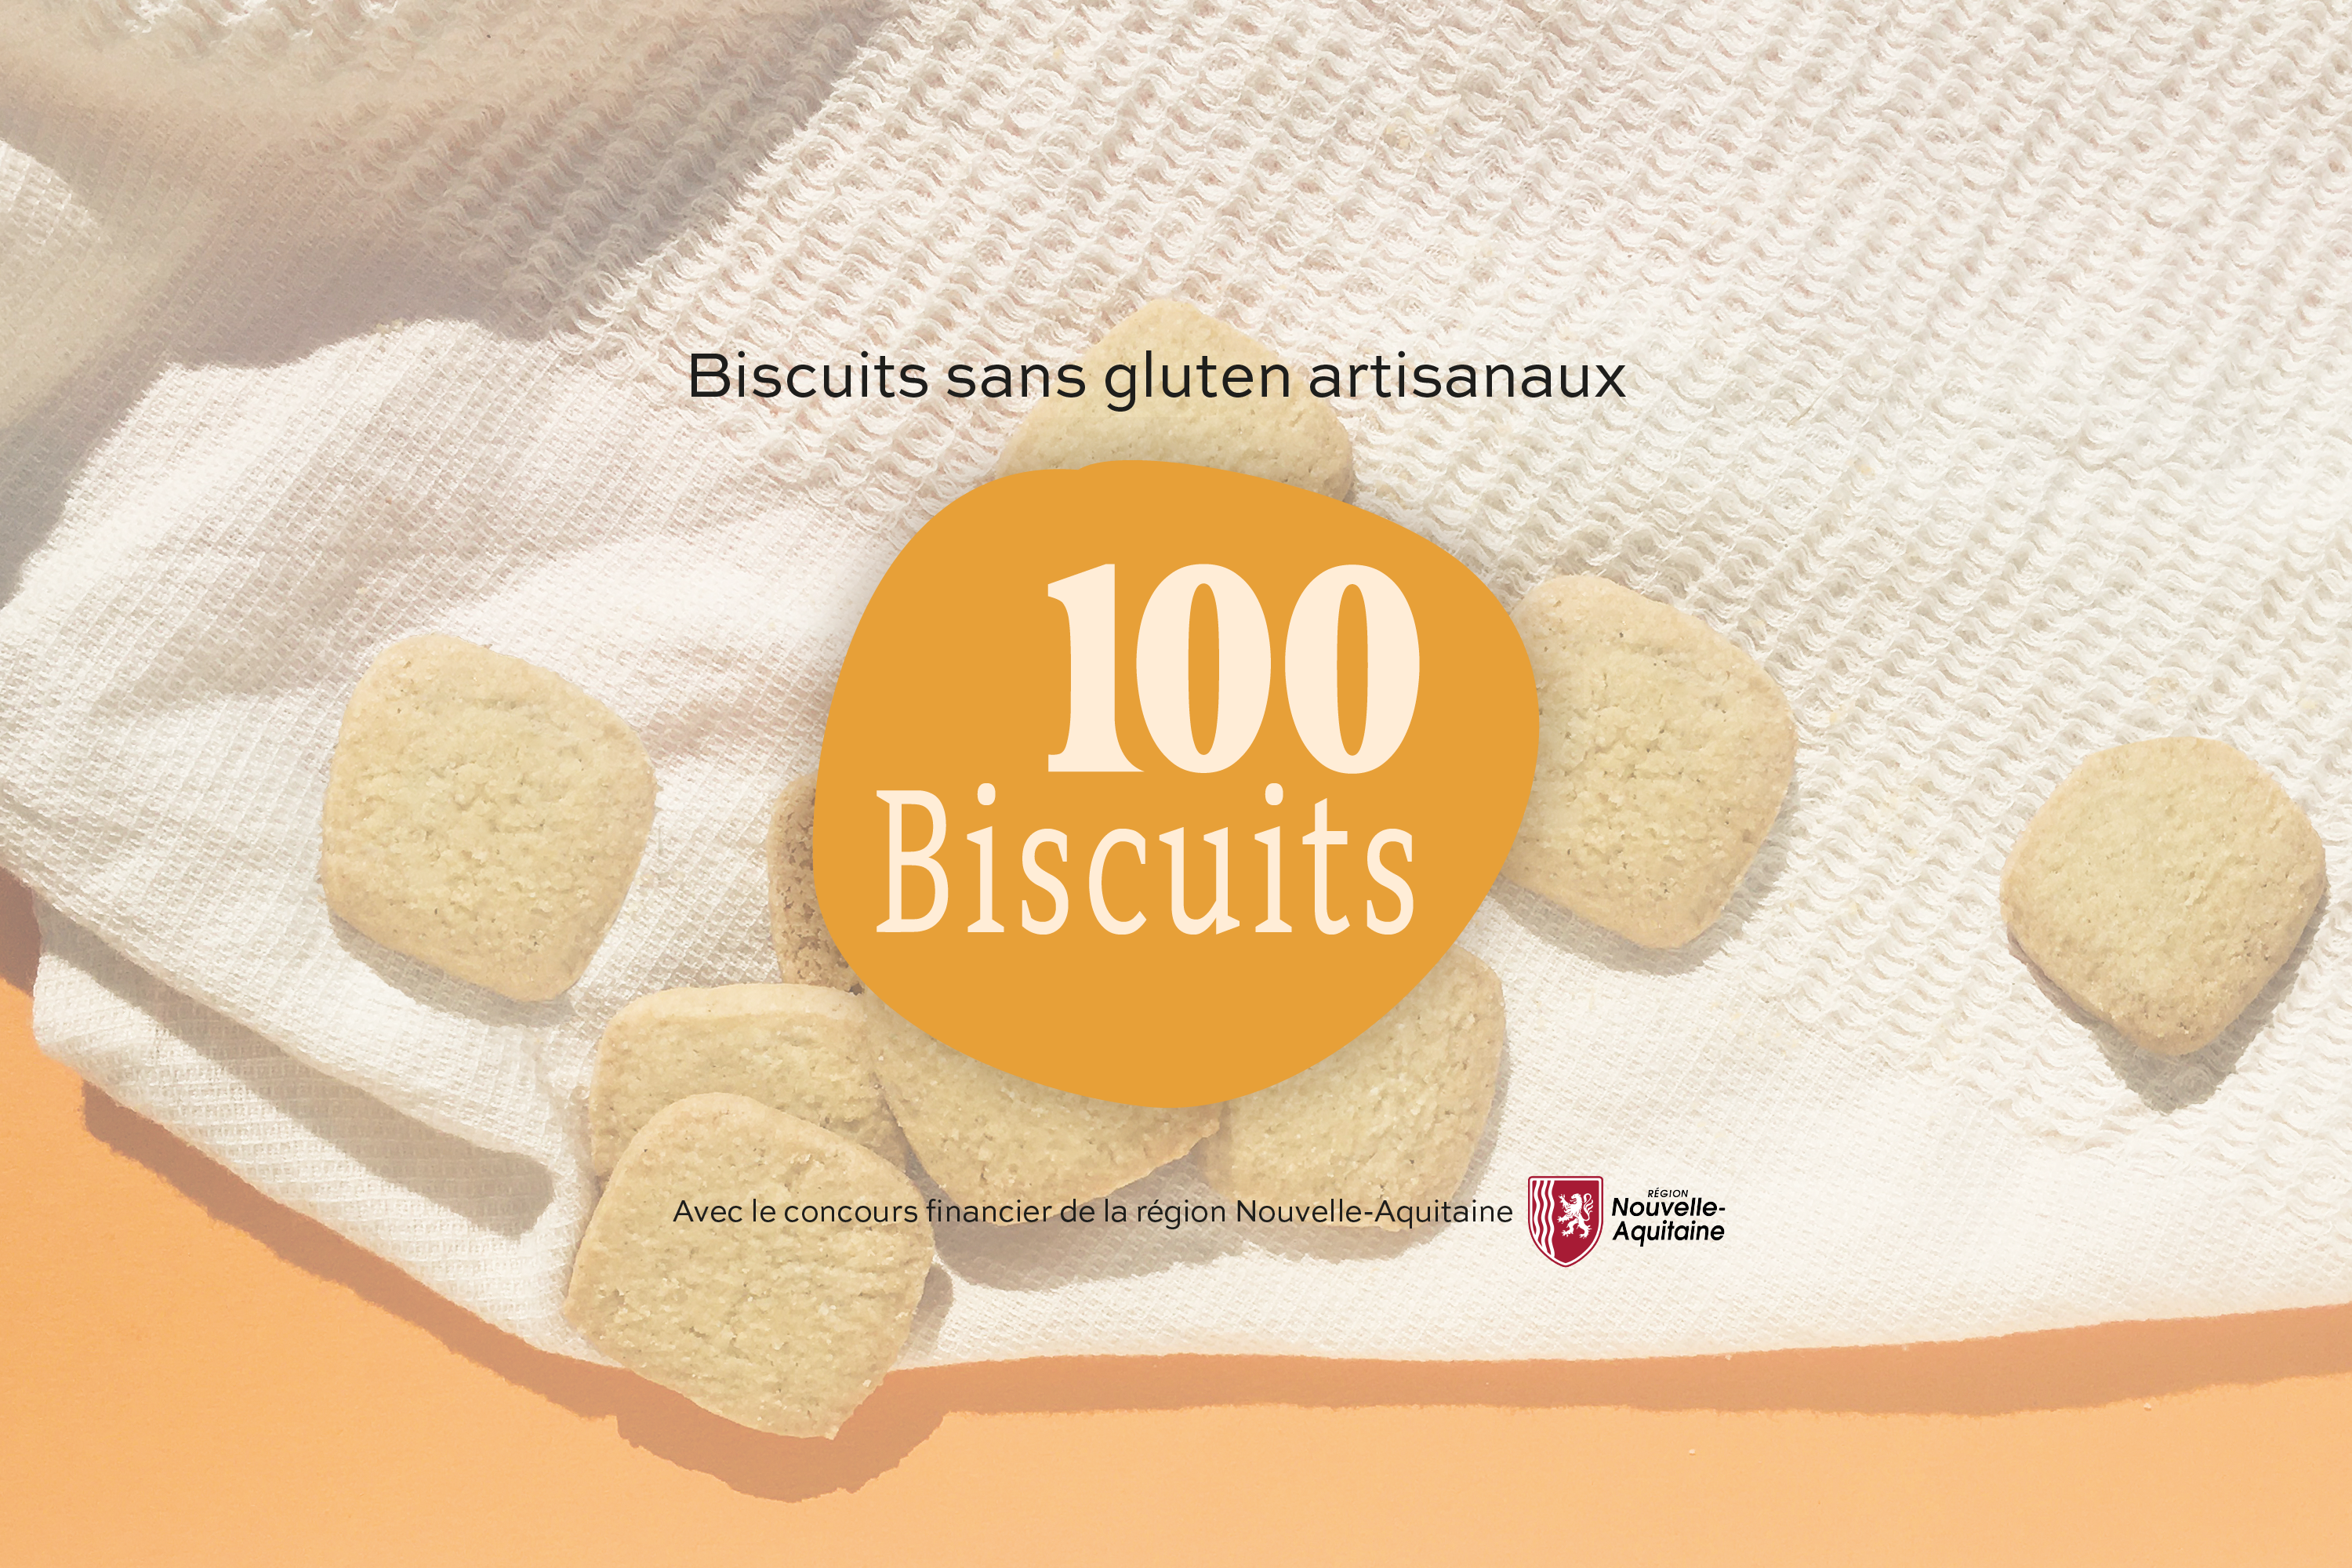 100 Biscuits logo